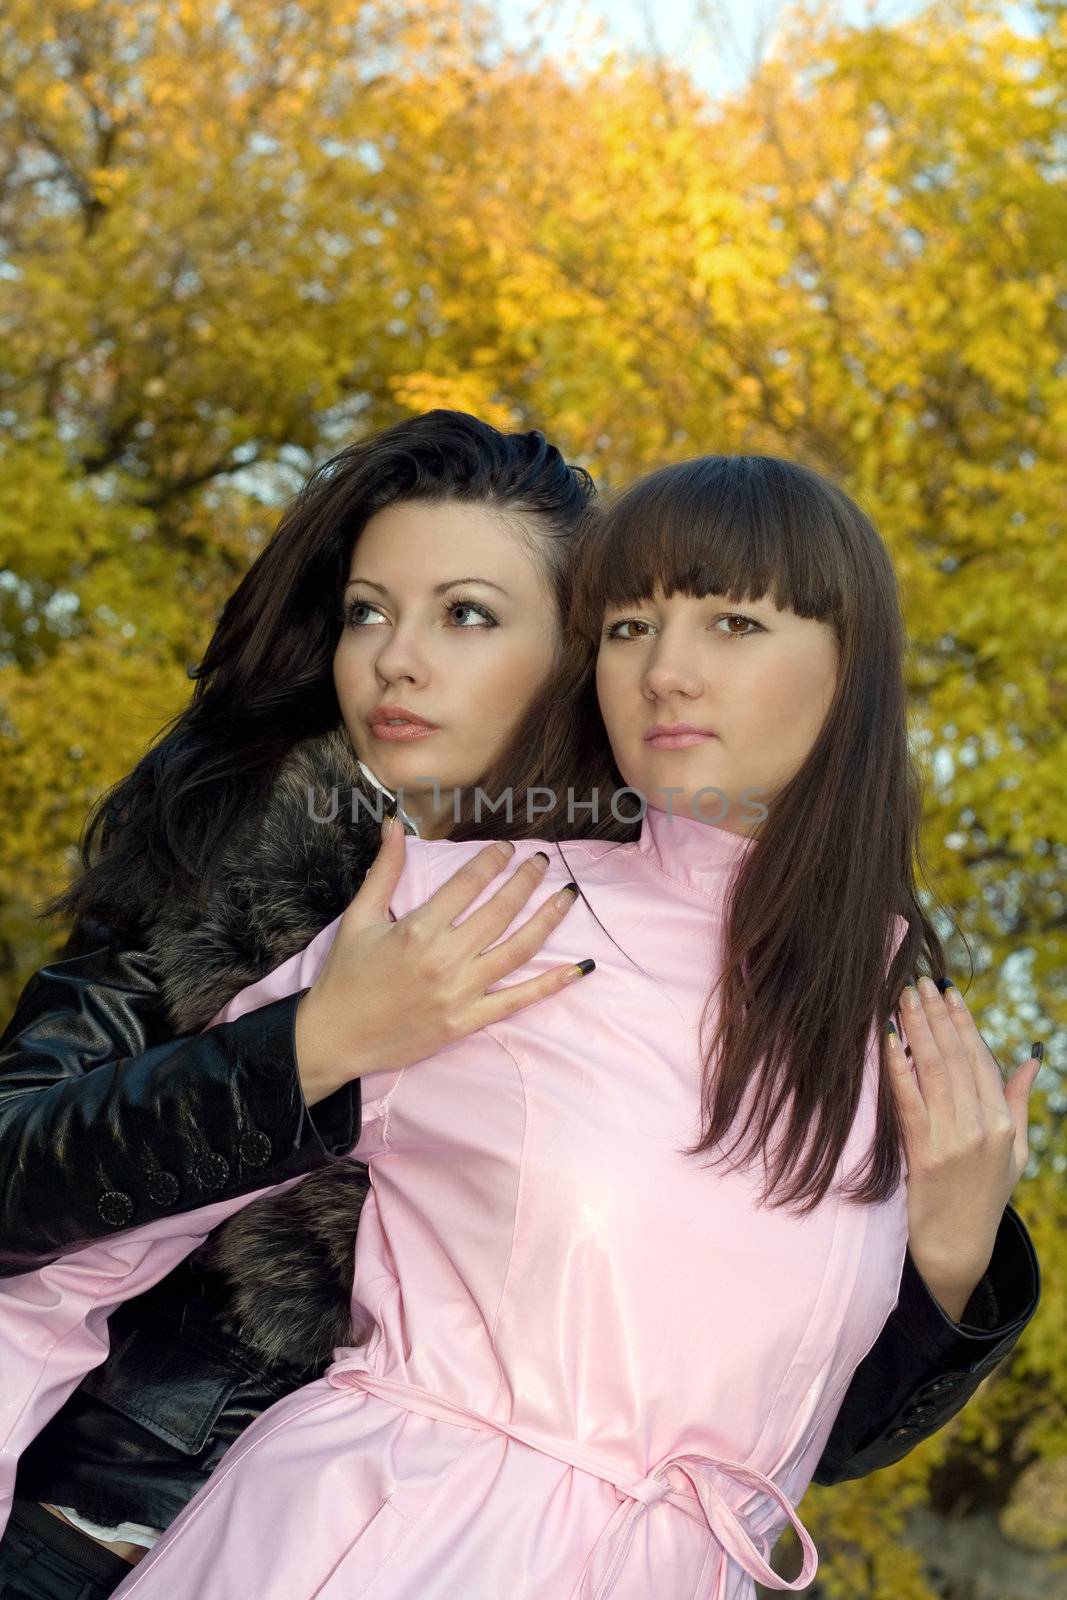 Two beauty young women outdoors in the autumn